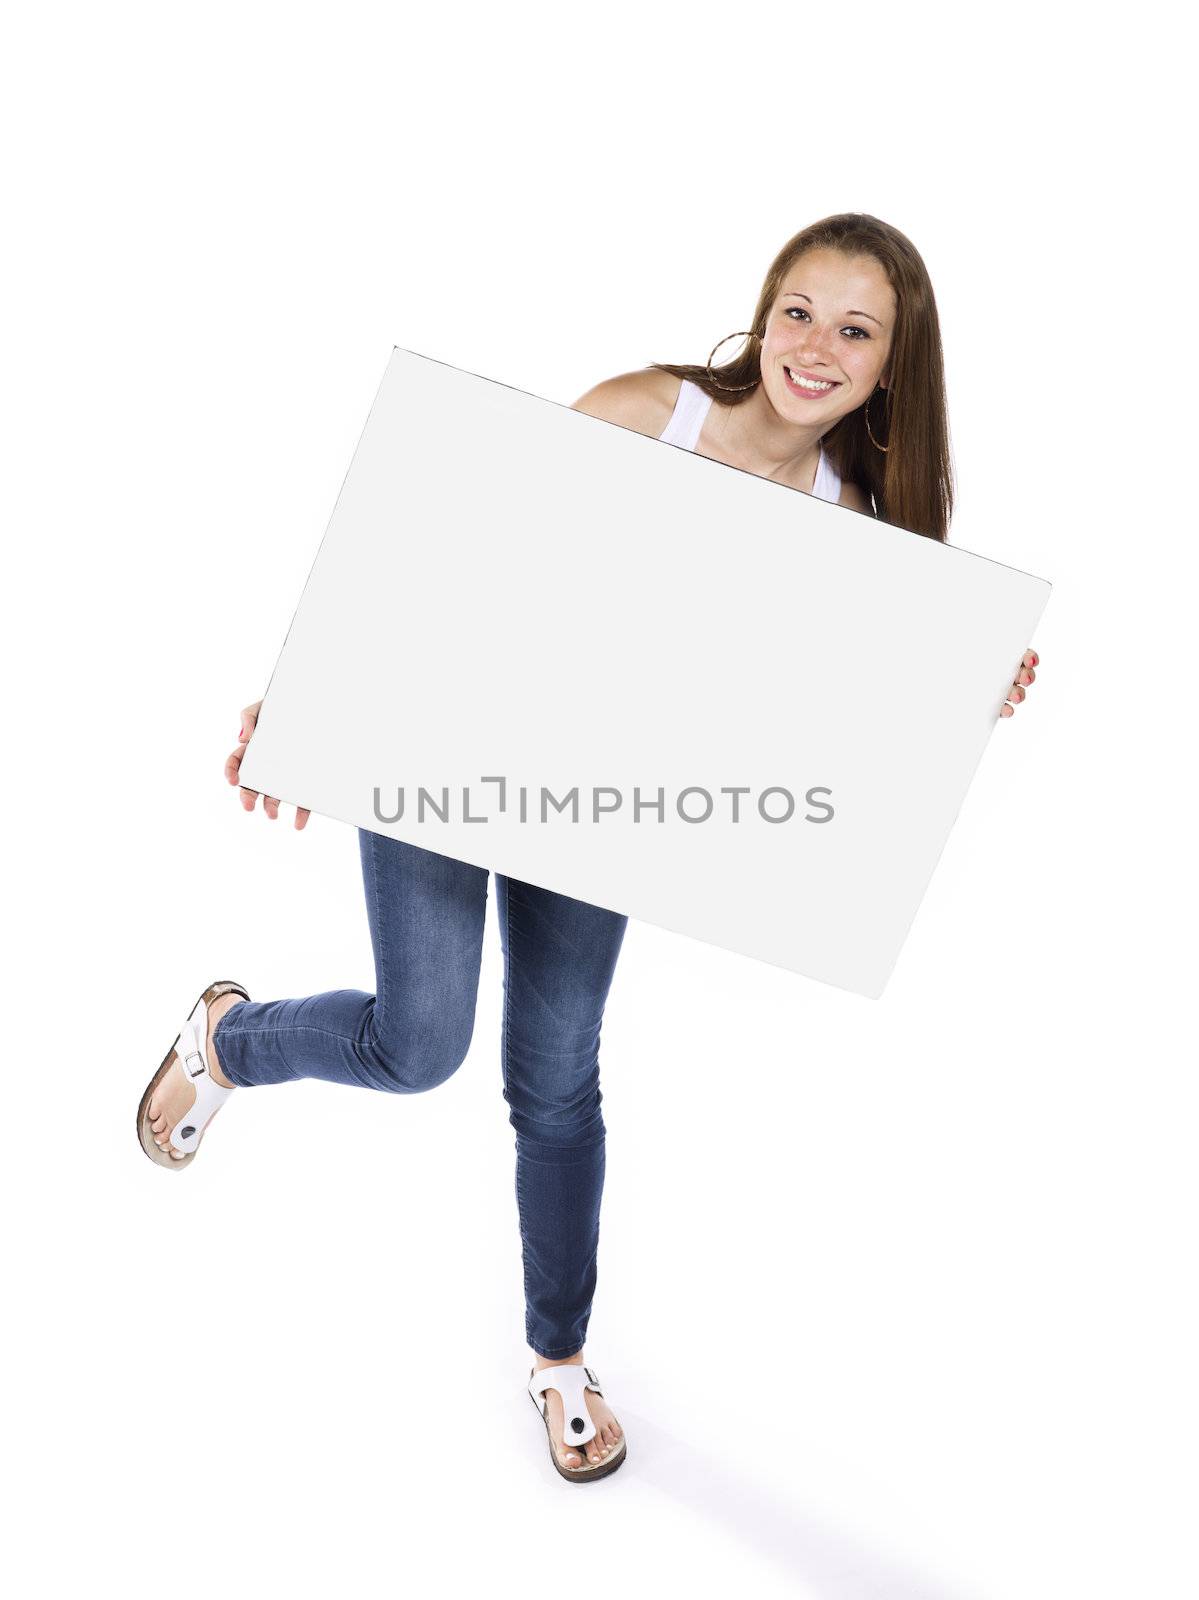 Cute teenage girl standing on one leg with a billboard against white background.